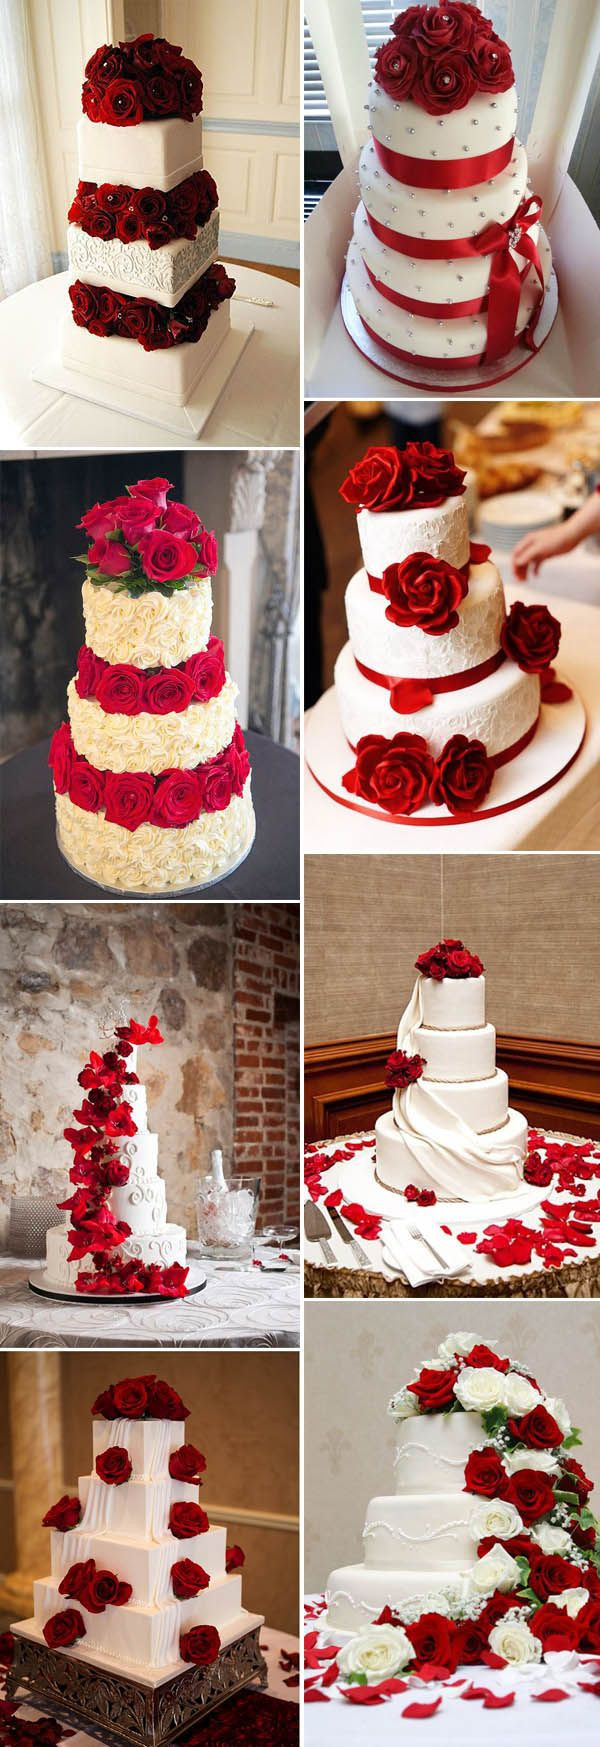 White And Red Wedding Cakes
 40 Inspirational Classic Red and White Wedding Ideas